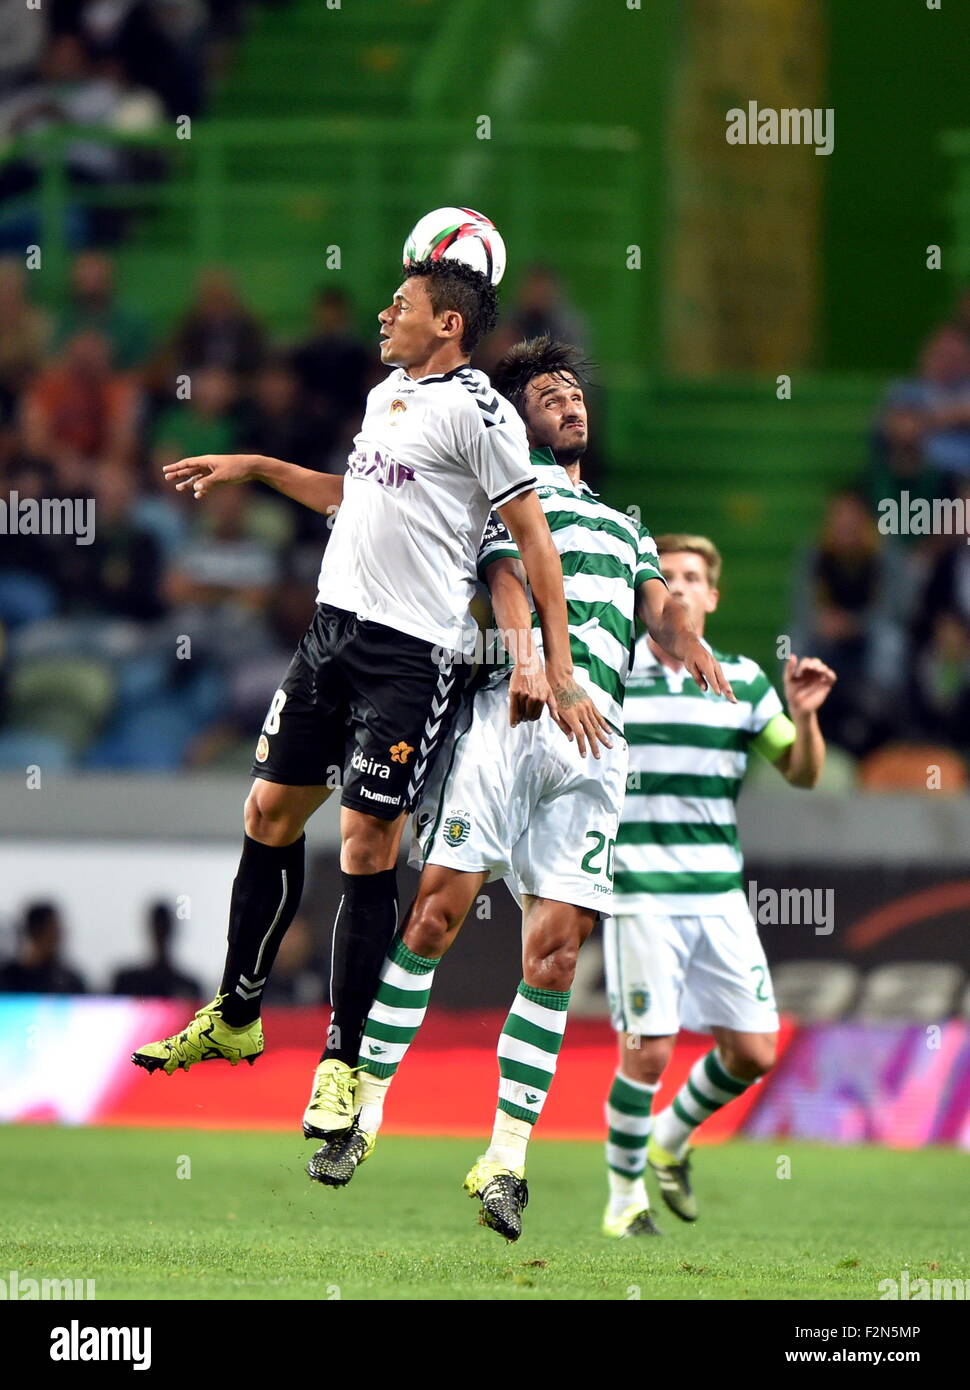 Lisbon, Portugal. 21st Sep, 2015. Sporting's Bryan Ruiz(C) vies with Nacional's player during the 5th round of Portuguese league soccer match at the Alvalade stadium in Lisbon, Portugal, on Sept. 21, 2015. Sporting won 1-0. © Zhang Liyun/Xinhua/Alamy Live News Stock Photo